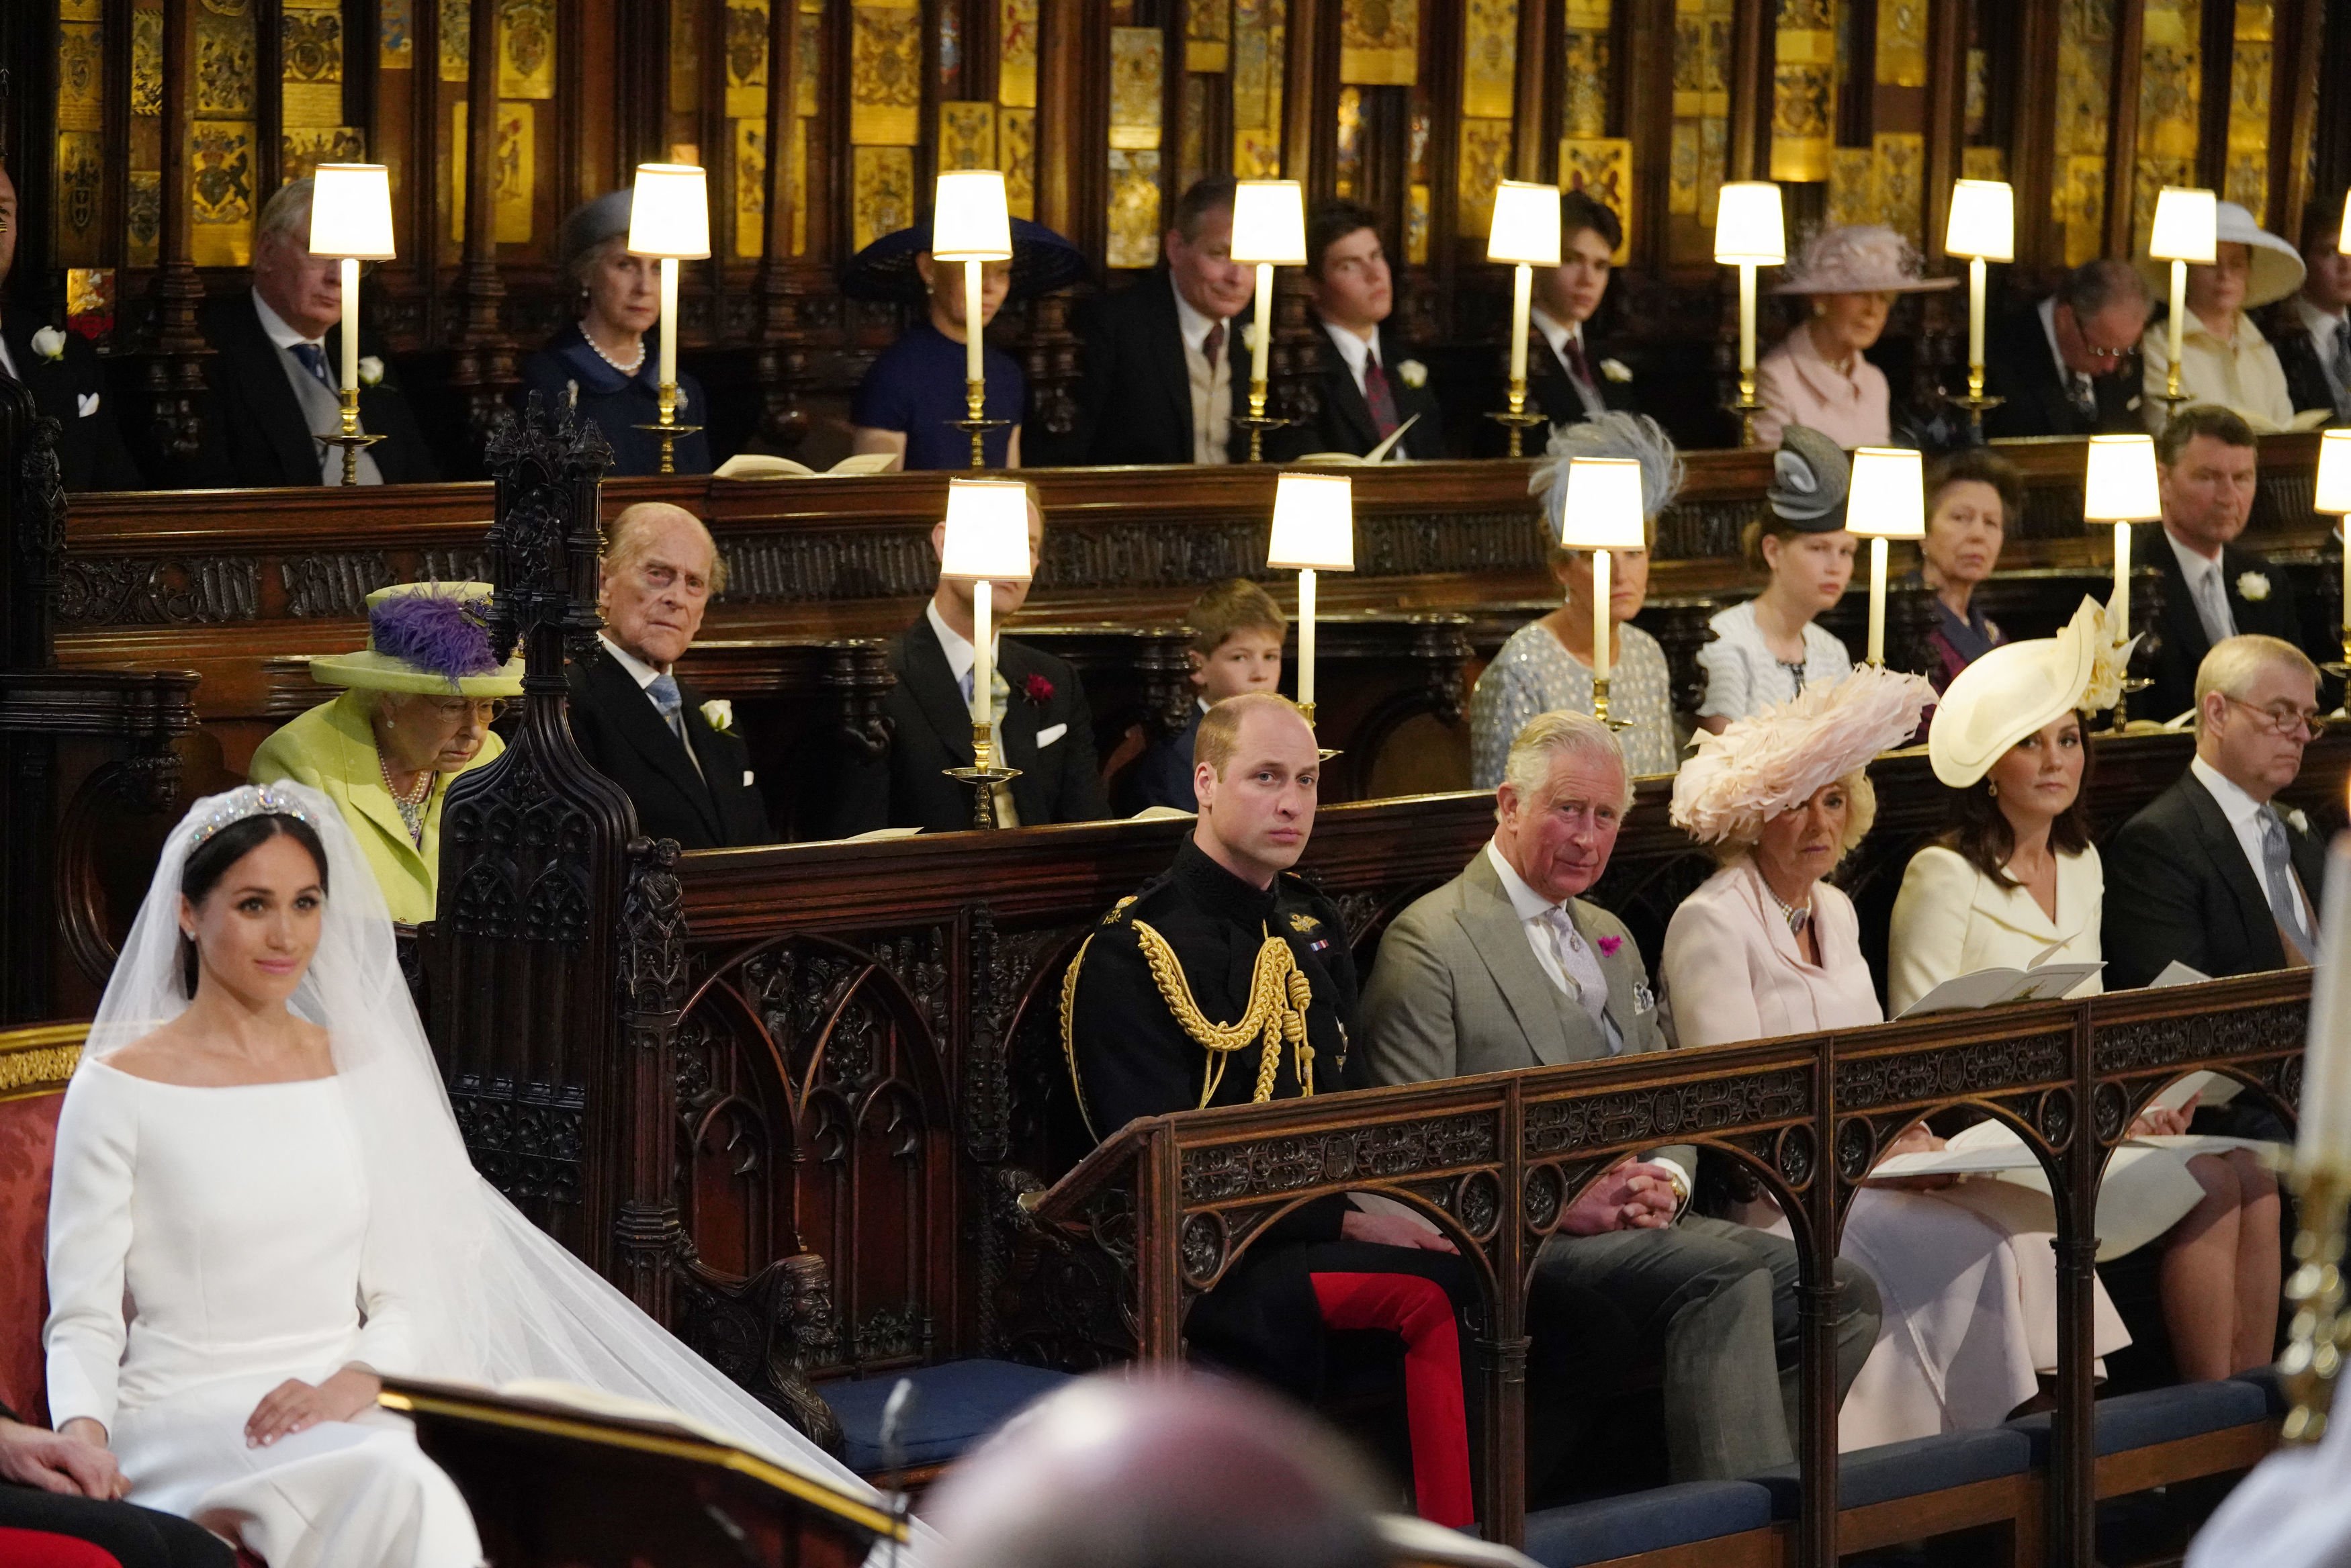 Meghan Markle seated near the royal family in St George's Chapel for her wedding to Prince Harry